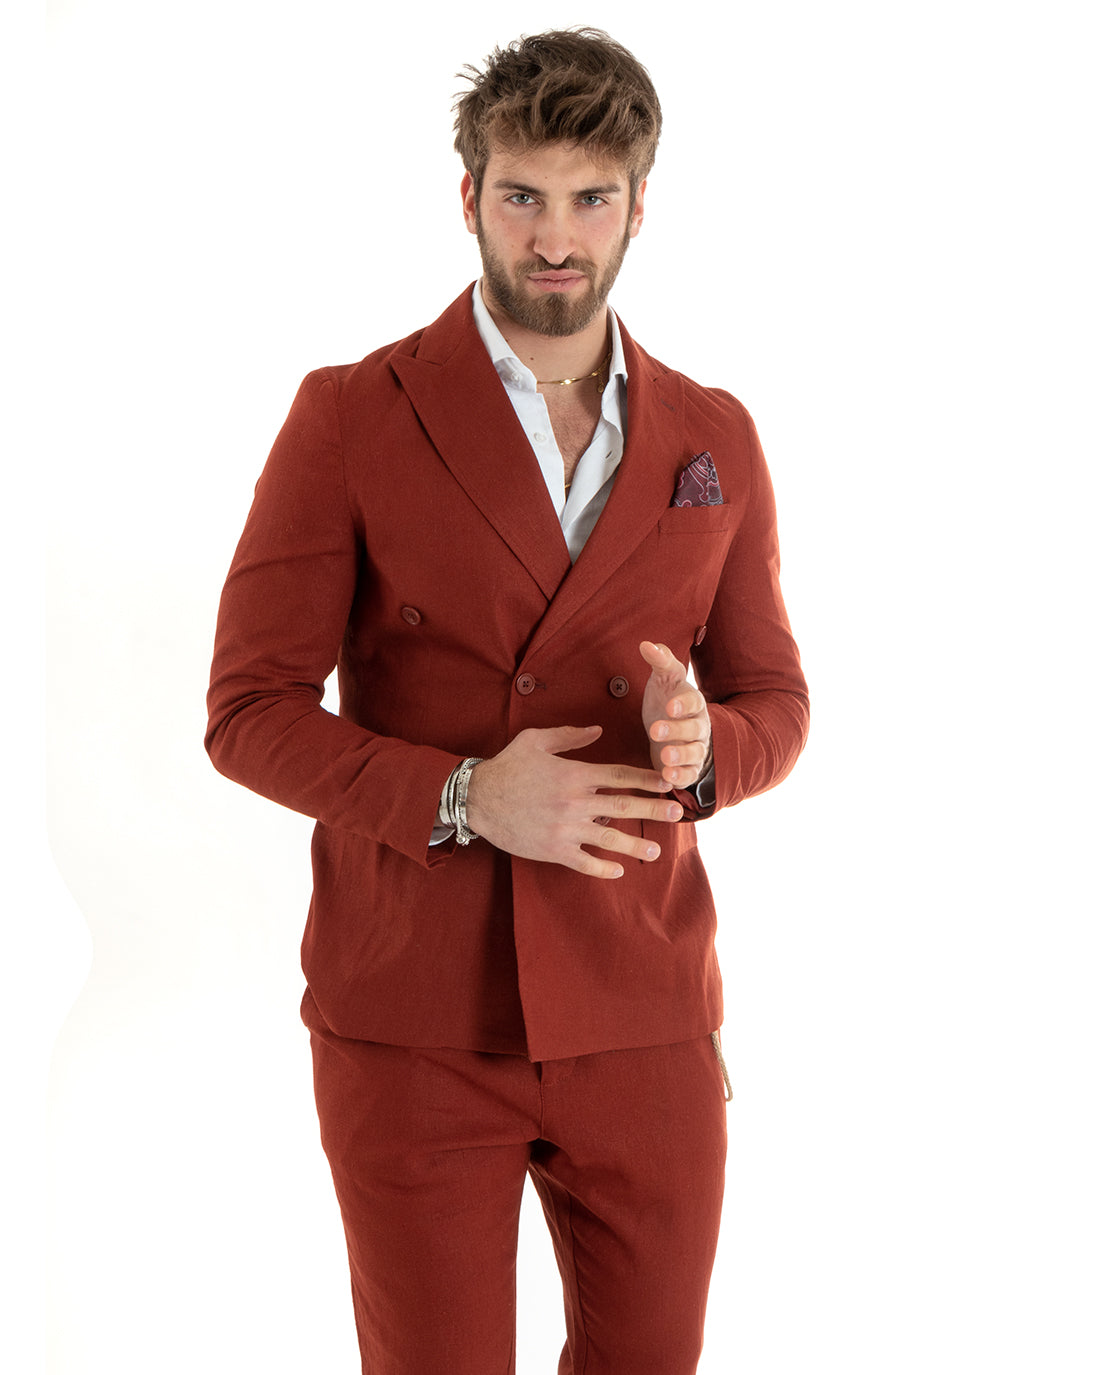 Double-breasted men's suit, tailored linen suit, jacket, trousers, solid color, brick GIOSAL-OU2335A